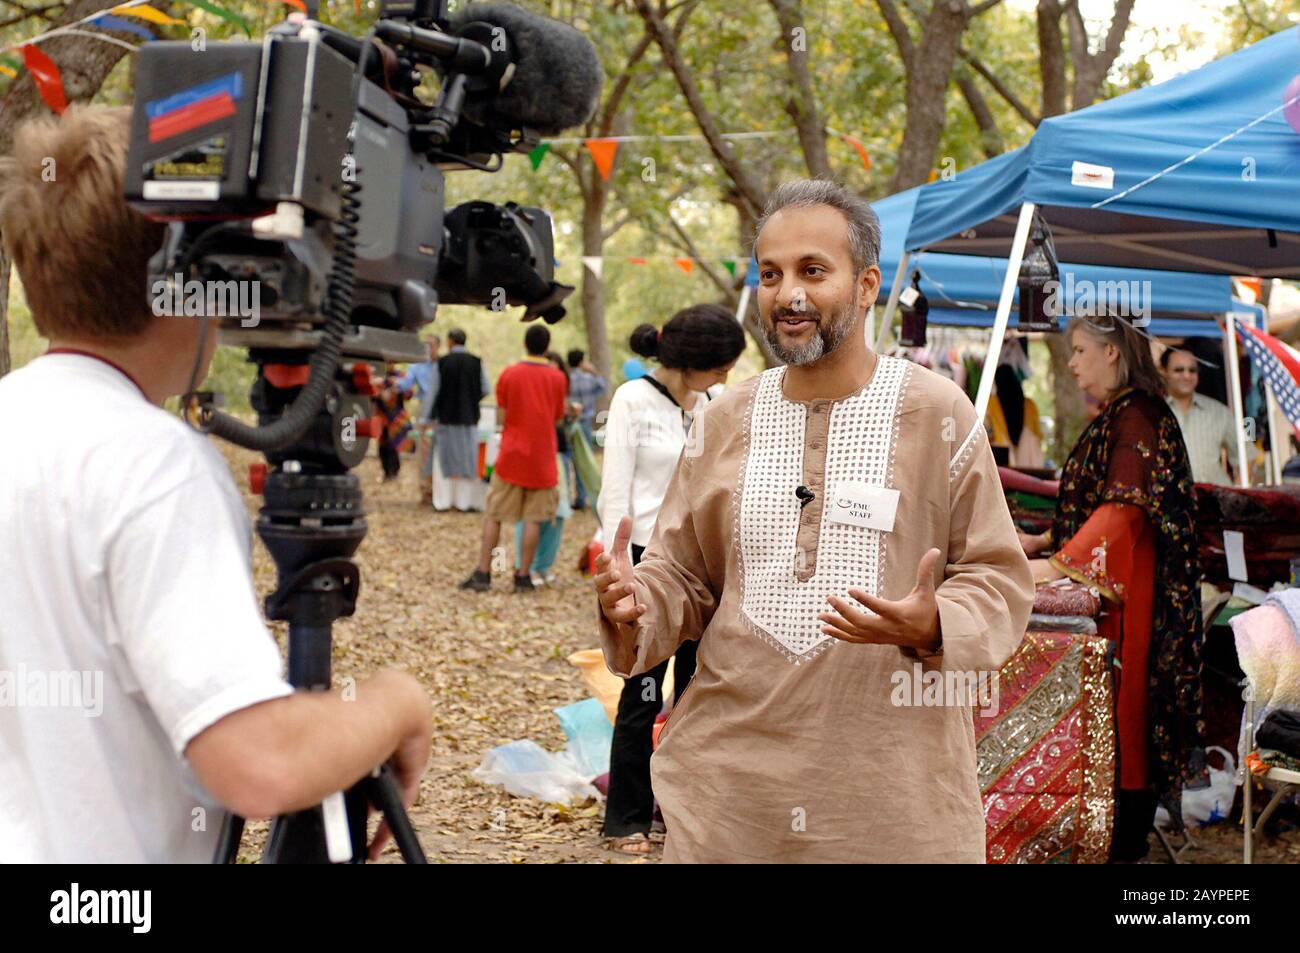 Austin, Texas: November 12, 2005: Muslim organizer of a local End of Ramadan (Eid) festival speaks to local television reporter at the event. The Muslim community of central Texas welcomed all faiths to the gathering showcasing food, dancing and festivities of the Muslim world, sponsored by the Forum of Muslims for Unity (FMU) of central Texas. ©Bob Daemmrich Stock Photo